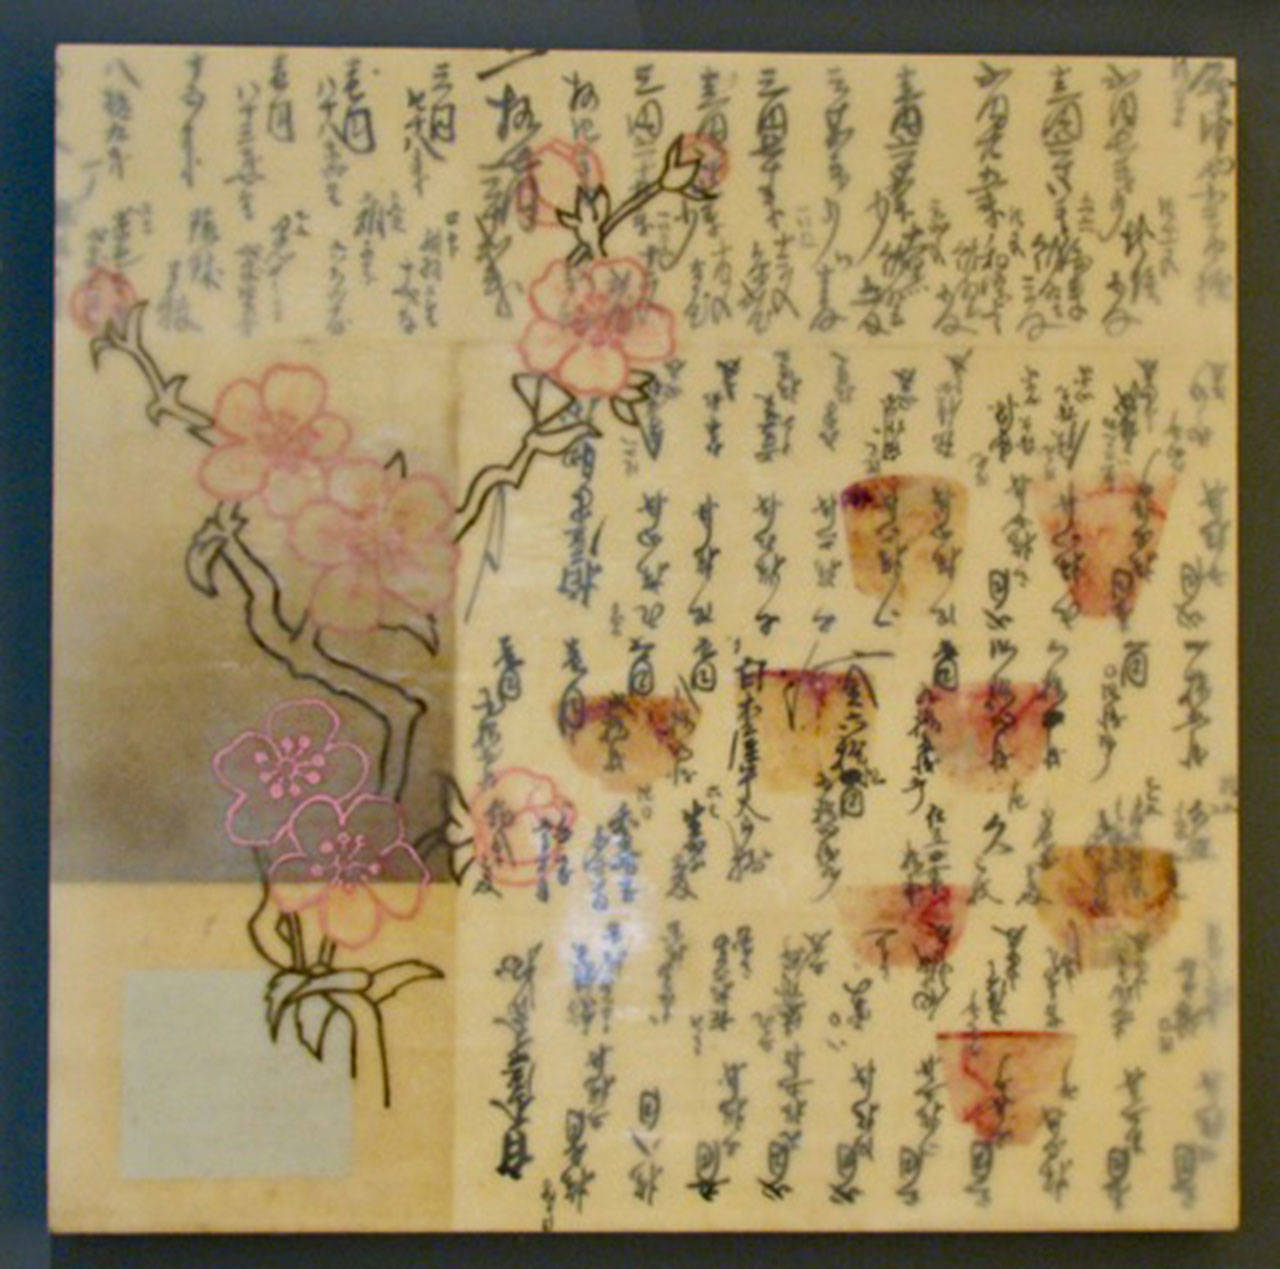 Mercer Island’s Clarke and Clarke Art and Artifacts will feature works from Valaree Cox’s new Encaustic series, “The Way Of Tea,” at its First Friday art and wine walk on May 4. The beautiful paper and exquisite writing is the background for hand cut paper chrysanthemums, Kanji and teabag stains, which are incorporated into each painting. Photo courtesy of Ginny Clarke